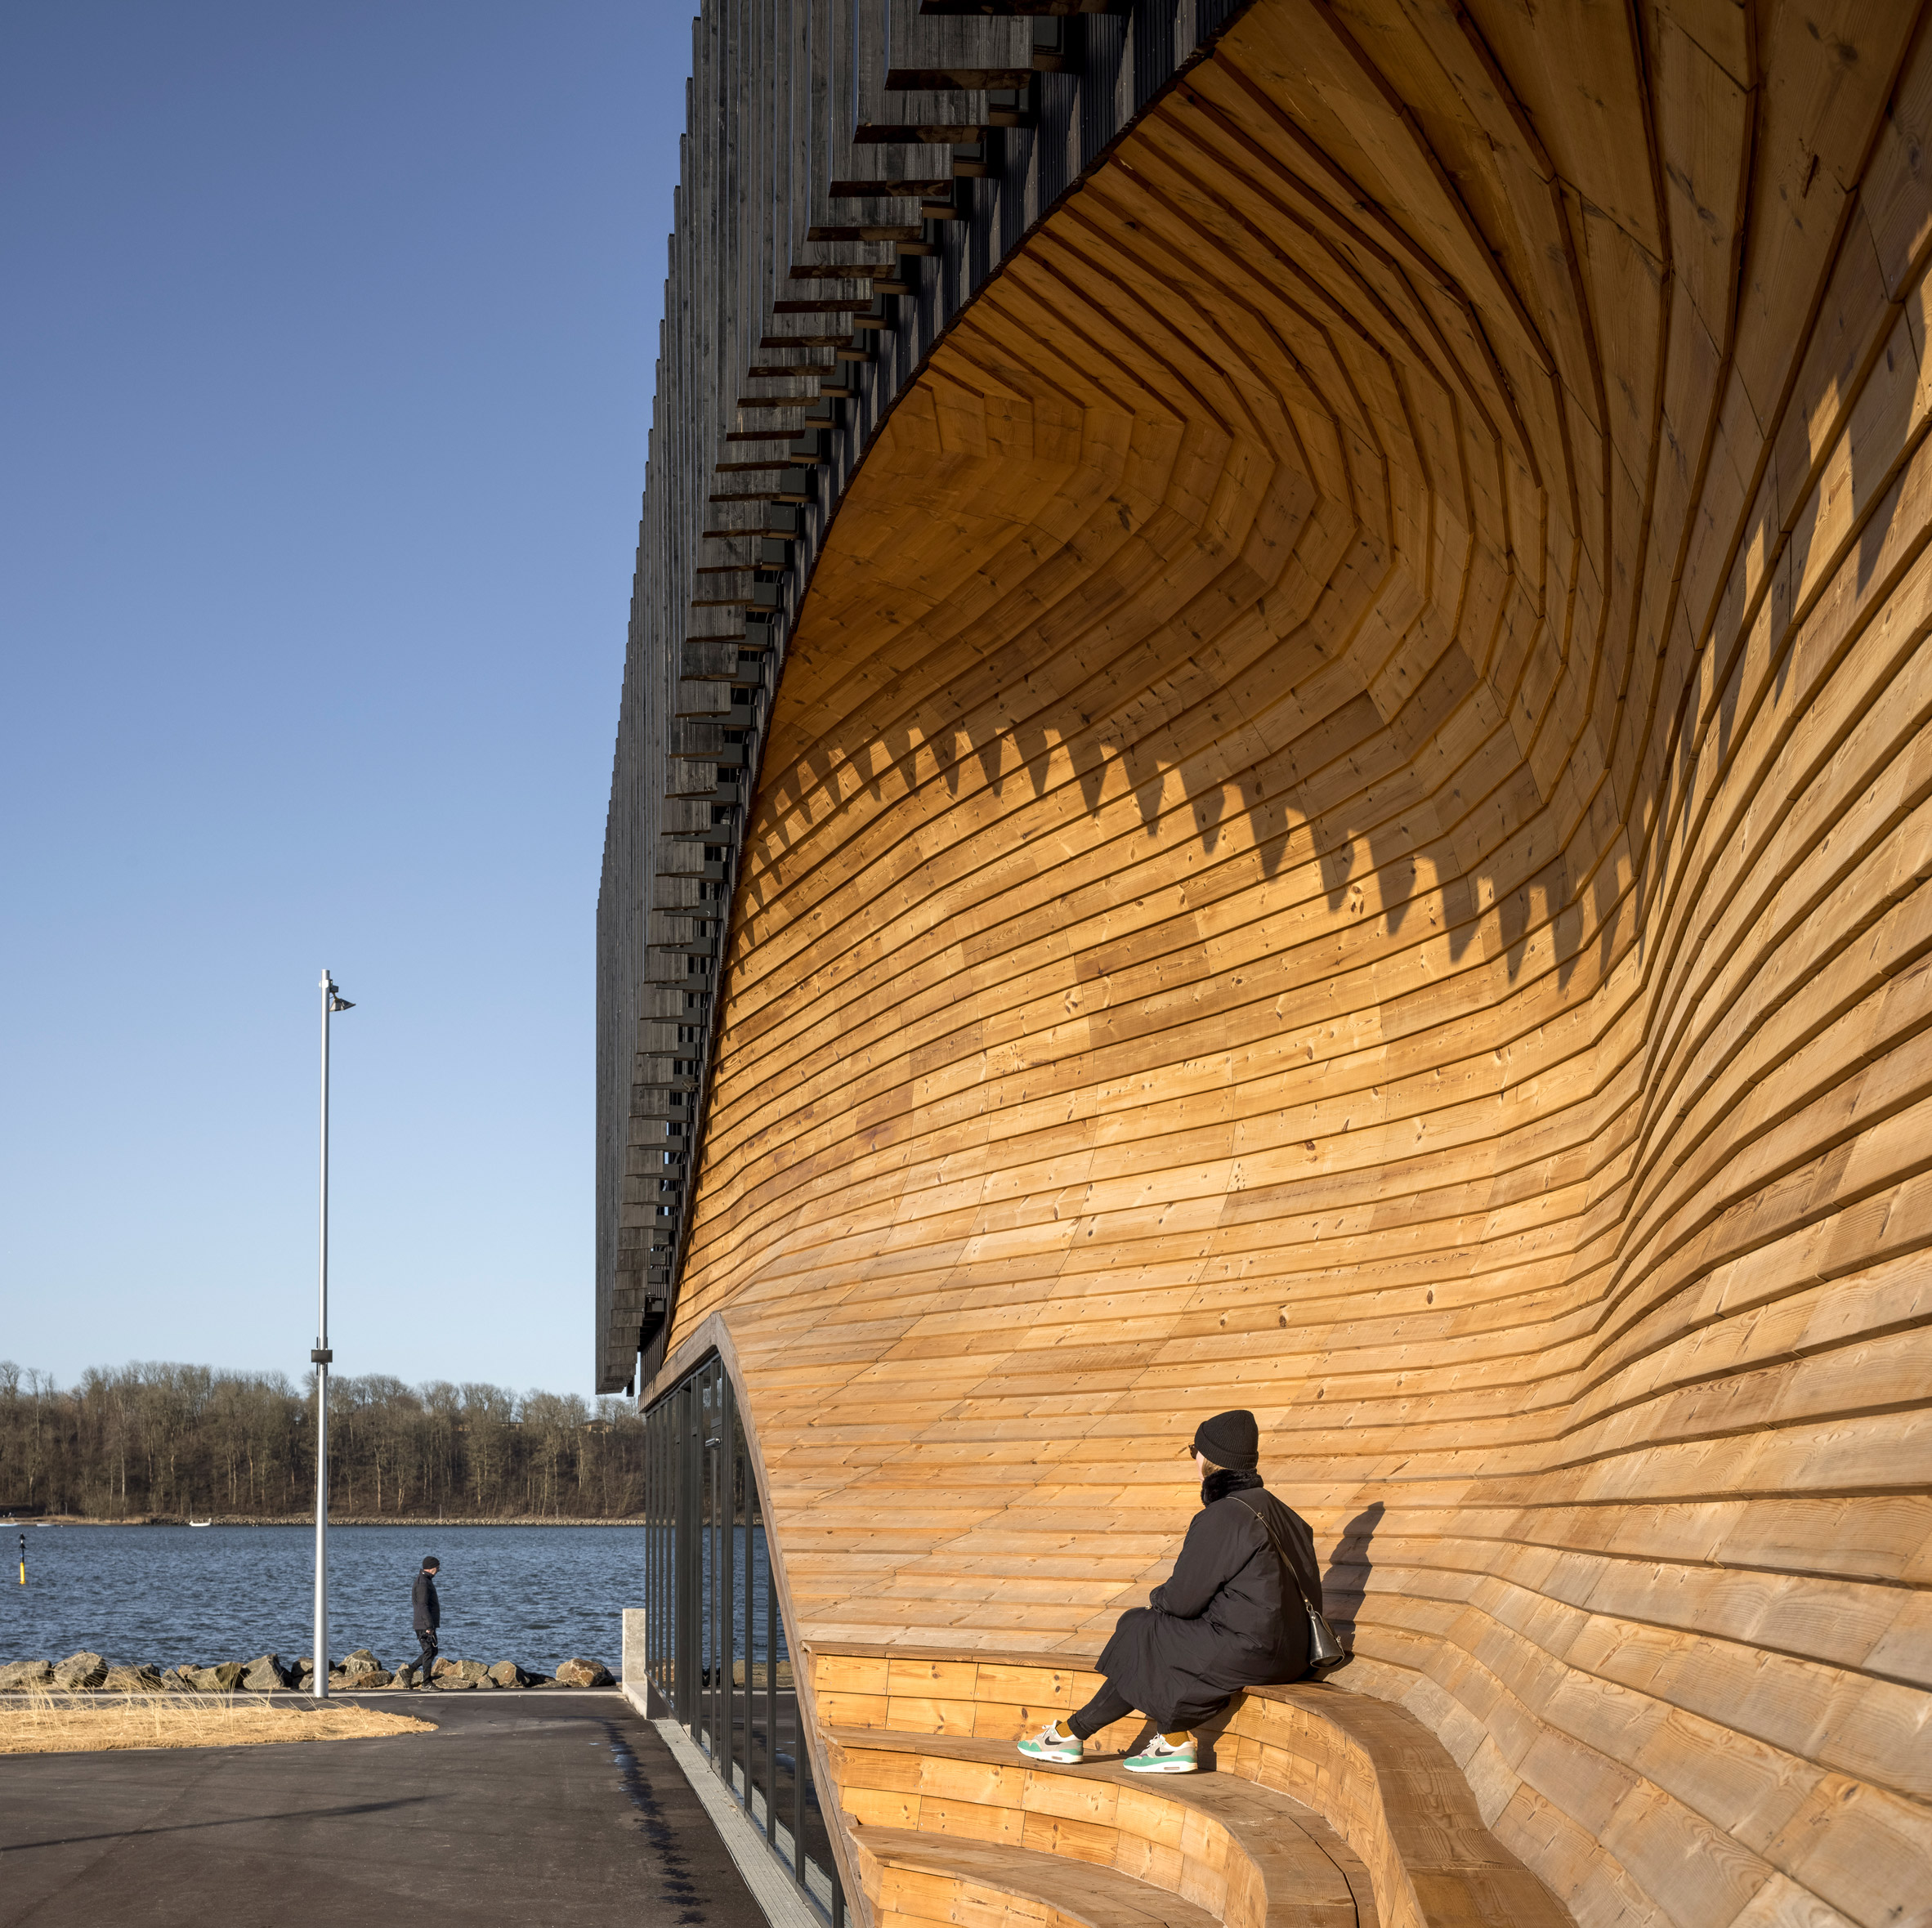 A wooden facade with integrated seating